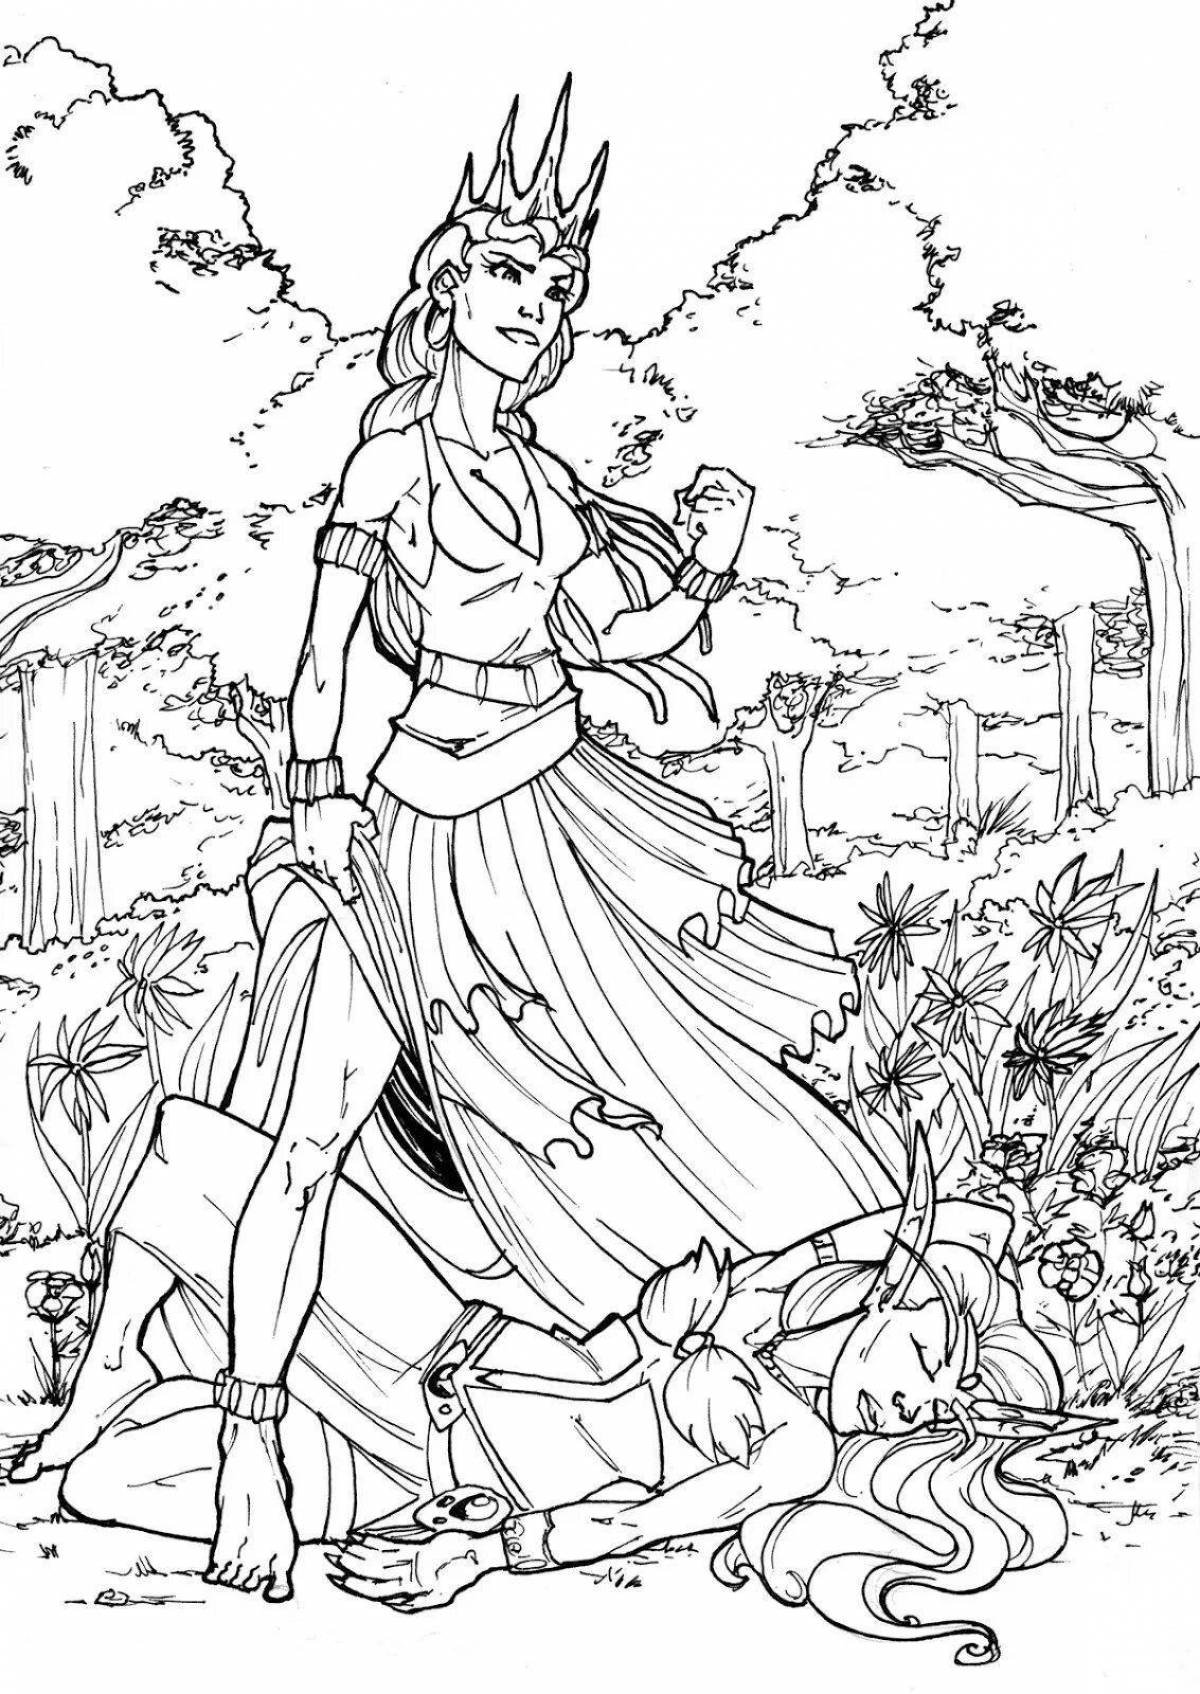 Colorful chronicles of narnia coloring page